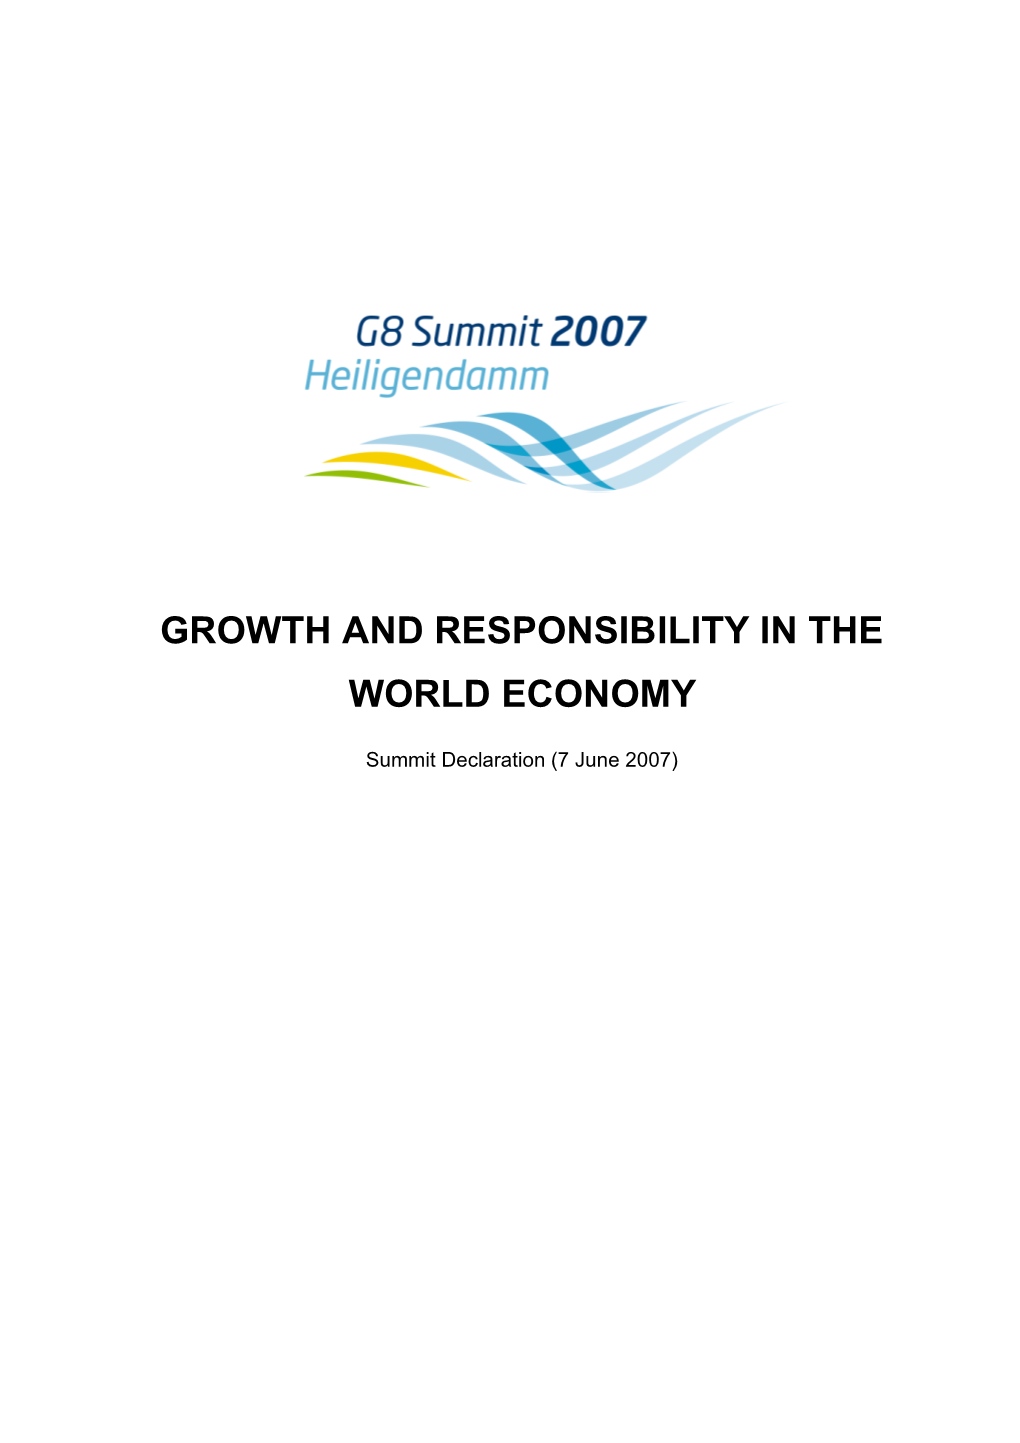 Growth and Responsibility in the World Economy